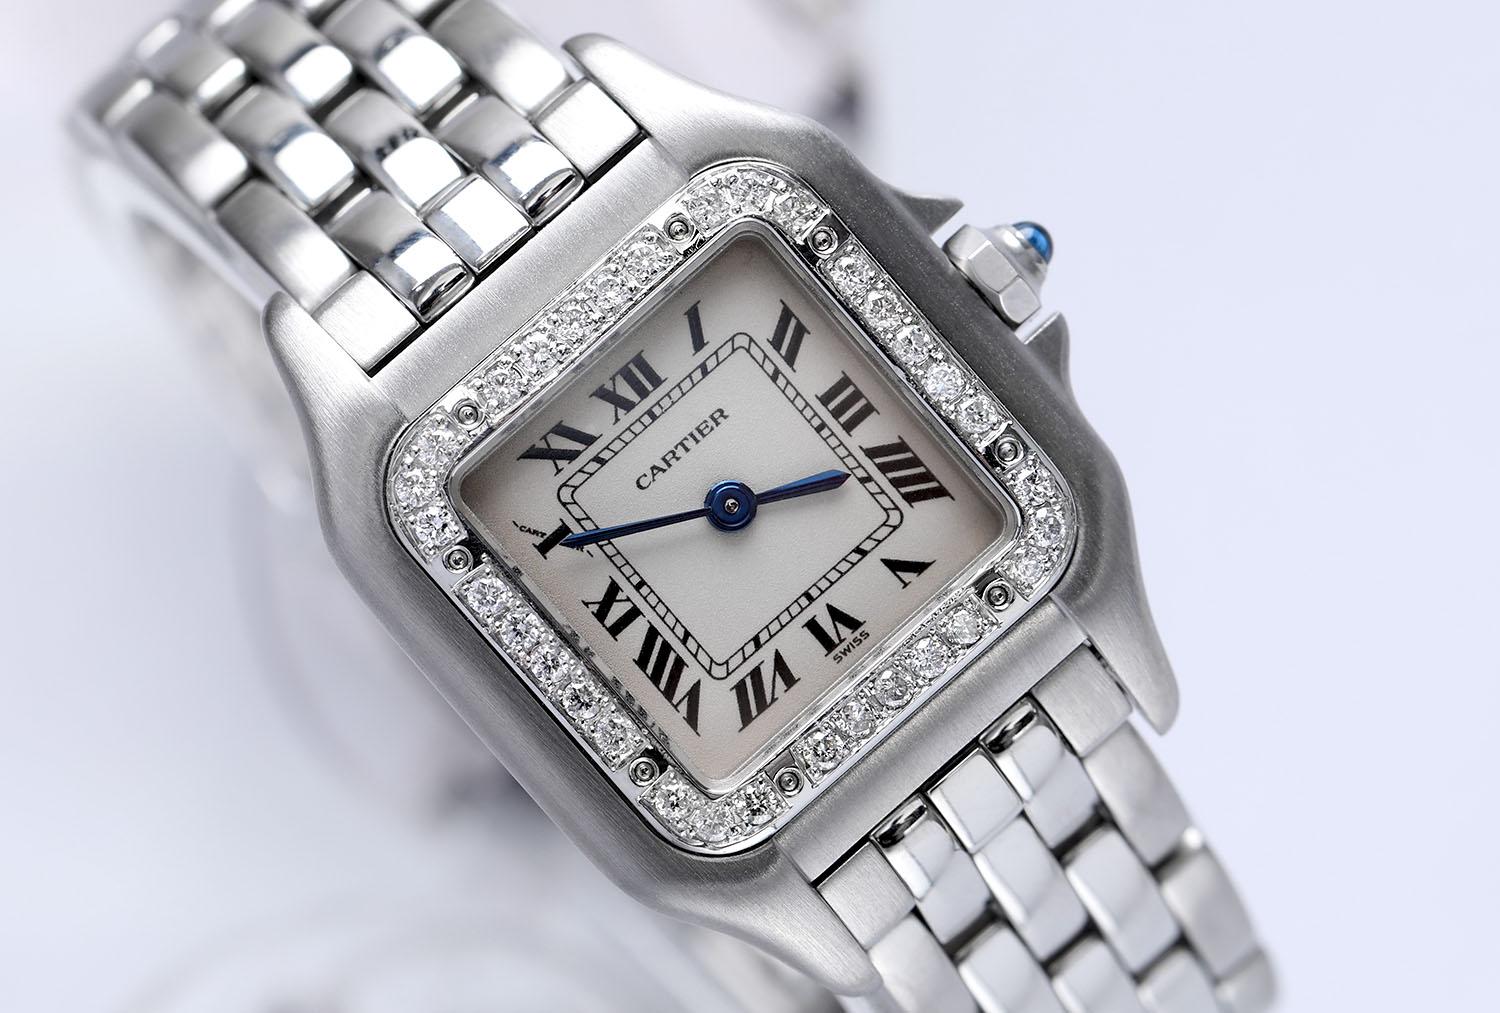 Diamond bezel has been set aftermarket with 100% natural diamonds in F color, VS/SI clarity. Watch has been professionally polished and does not have any visible scratches or blemishes. Bracelet can fit 6 inches wrist.

Sale comes with a jewelry box